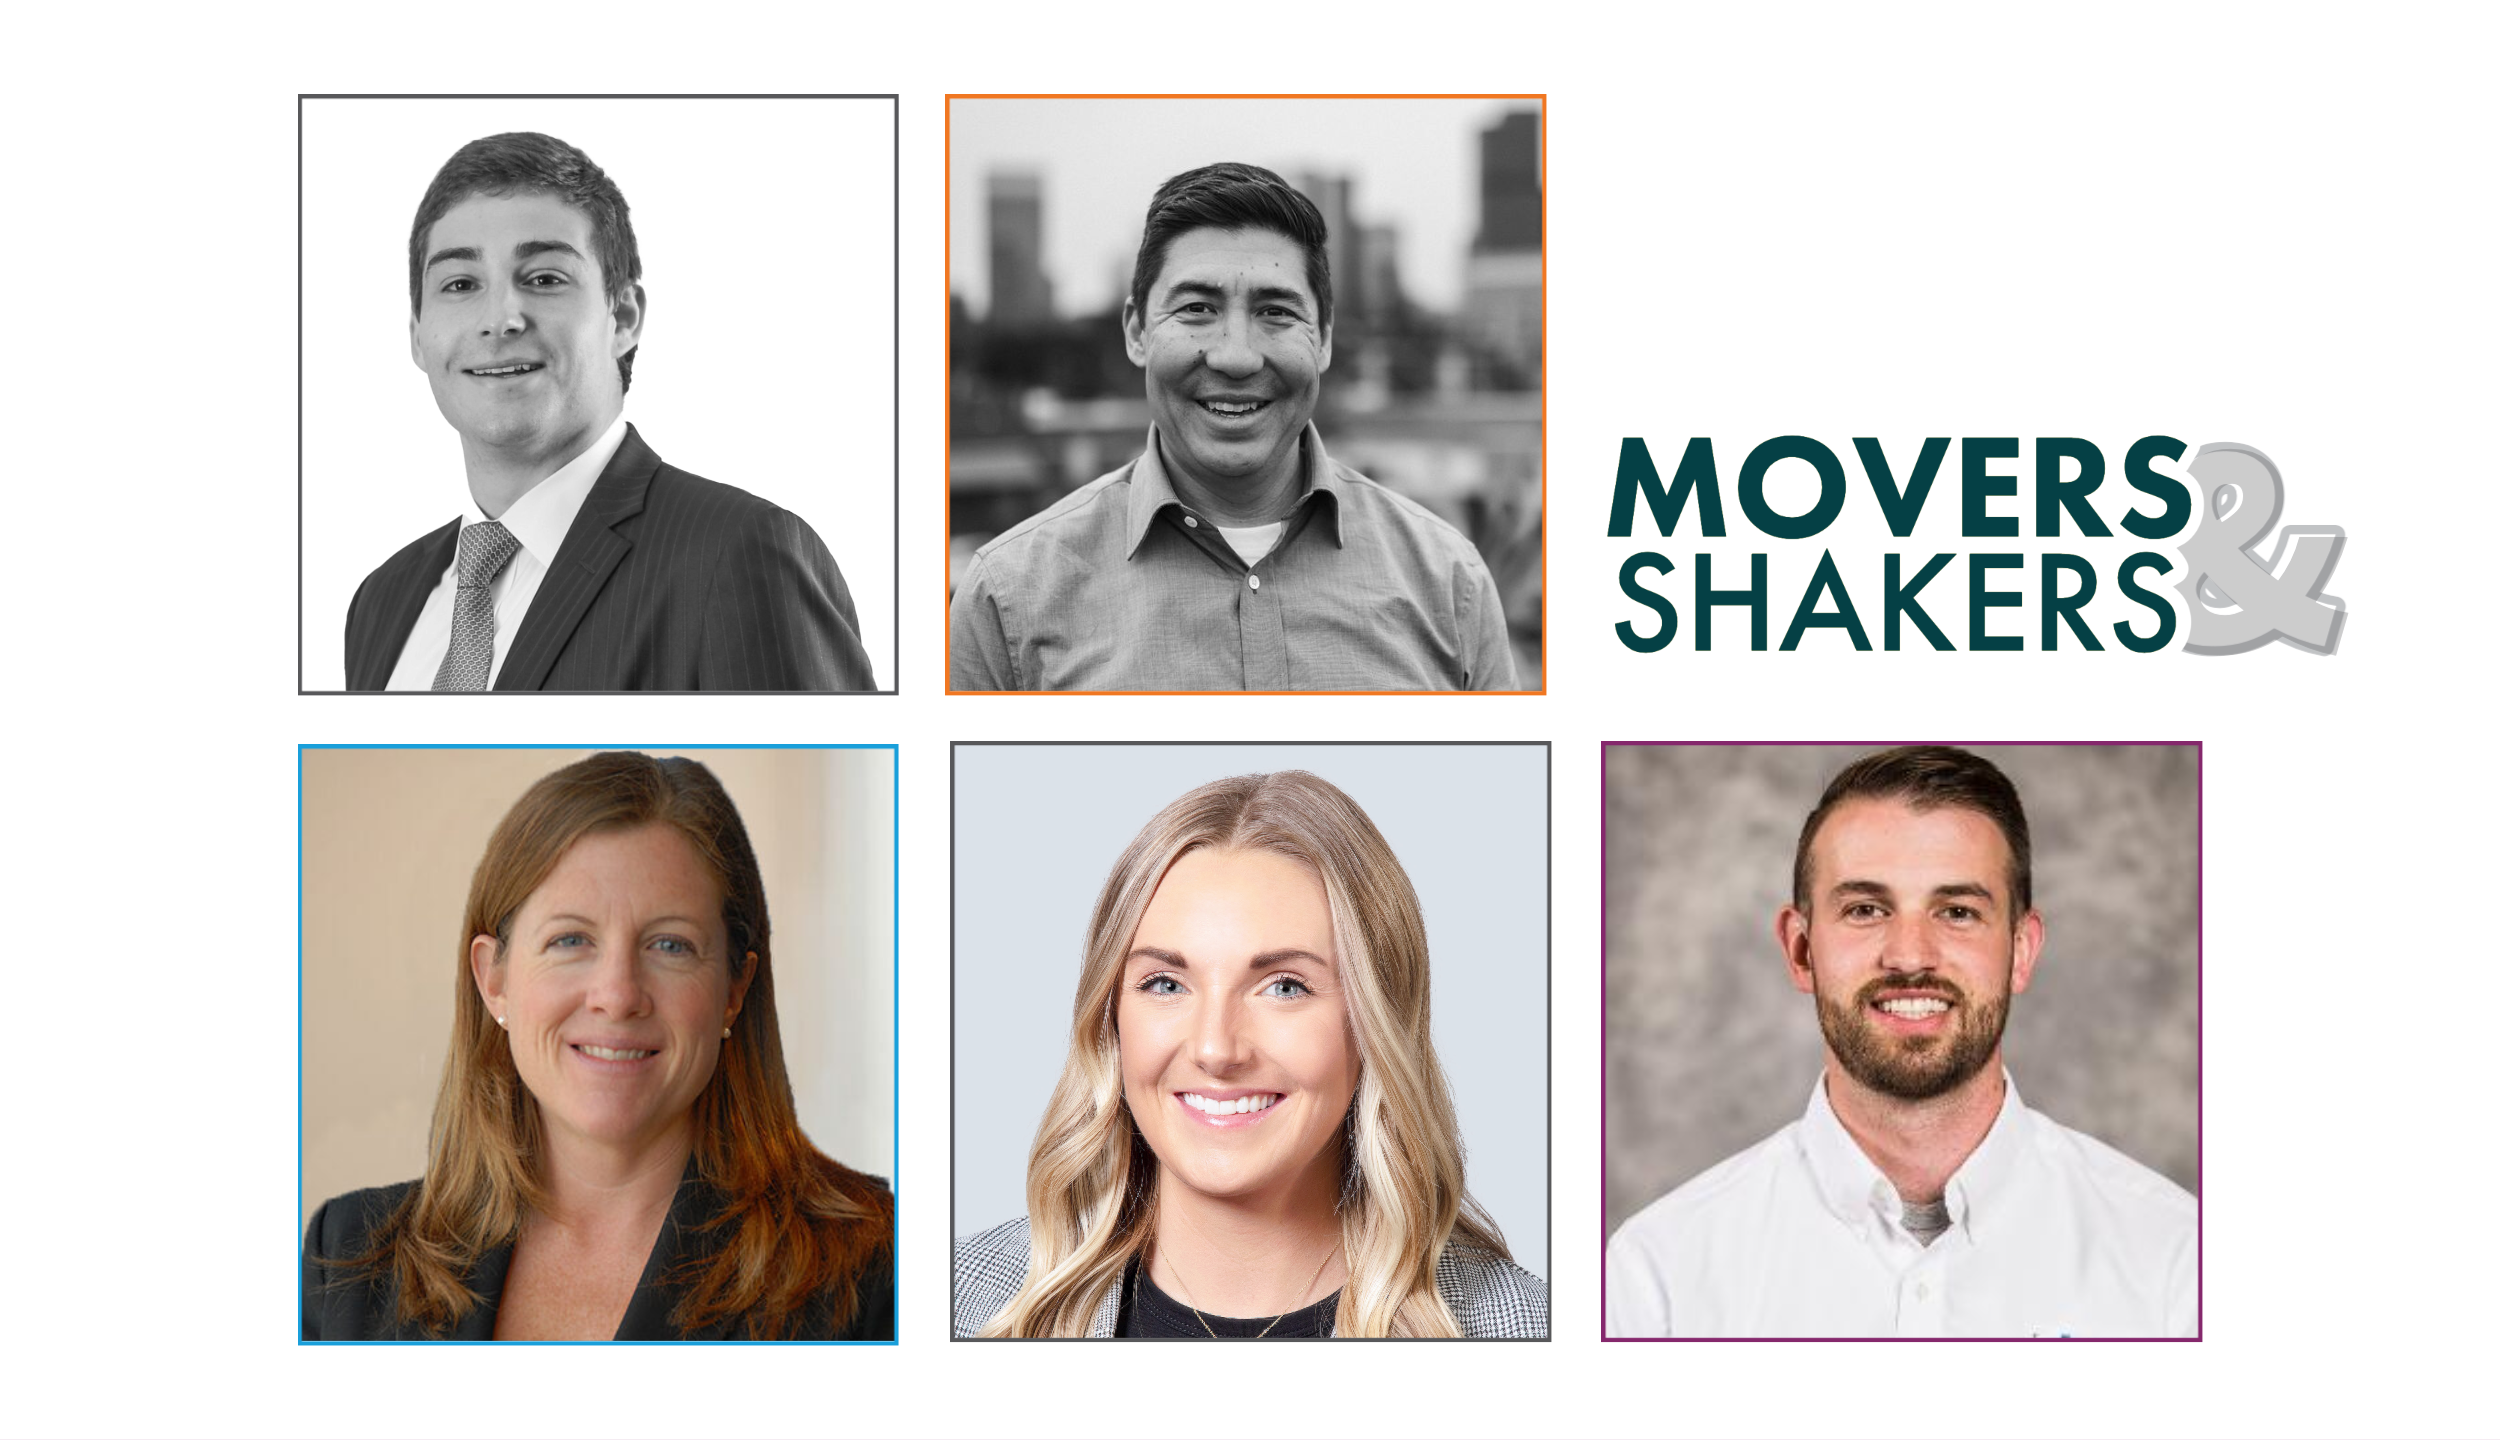 https://milehighcre.com/wp-content/uploads/2023/03/MHCRE-Movers-Shakers-Mar-30-8.png